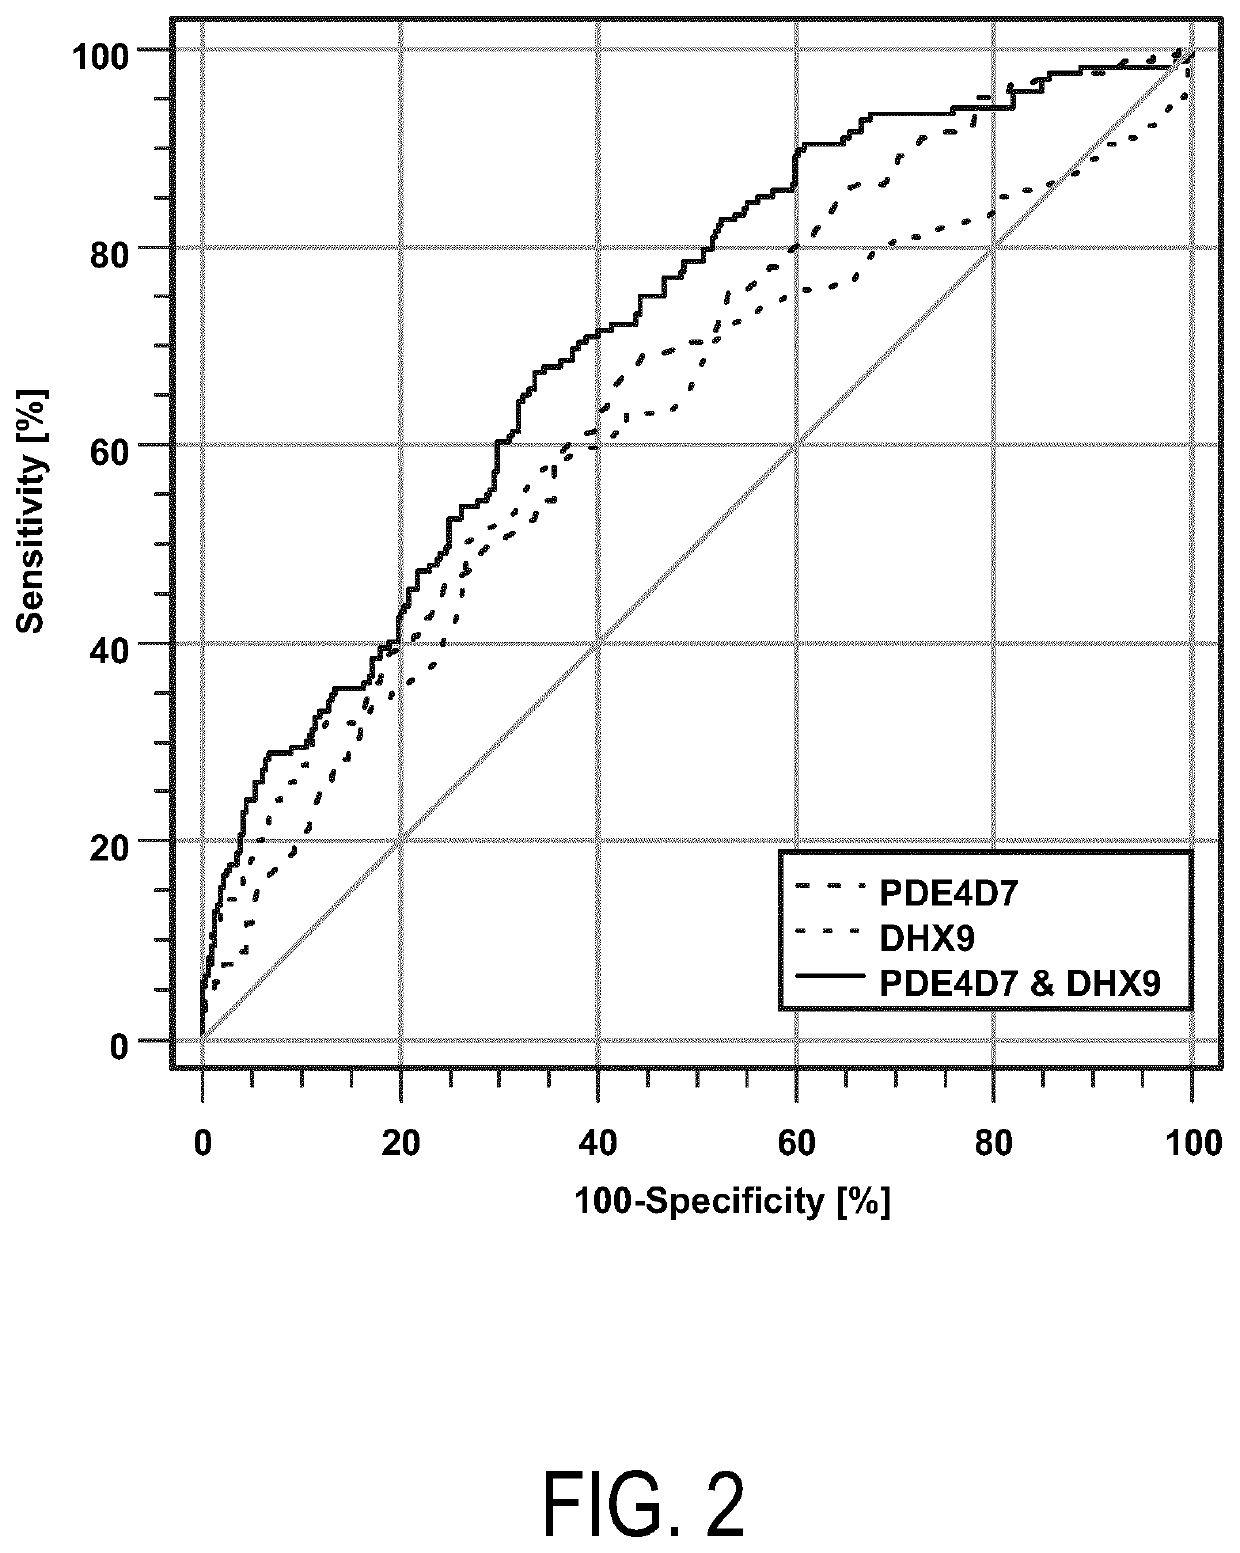 Pre-surgical risk stratification based on pde4d7 and dhx9 expression